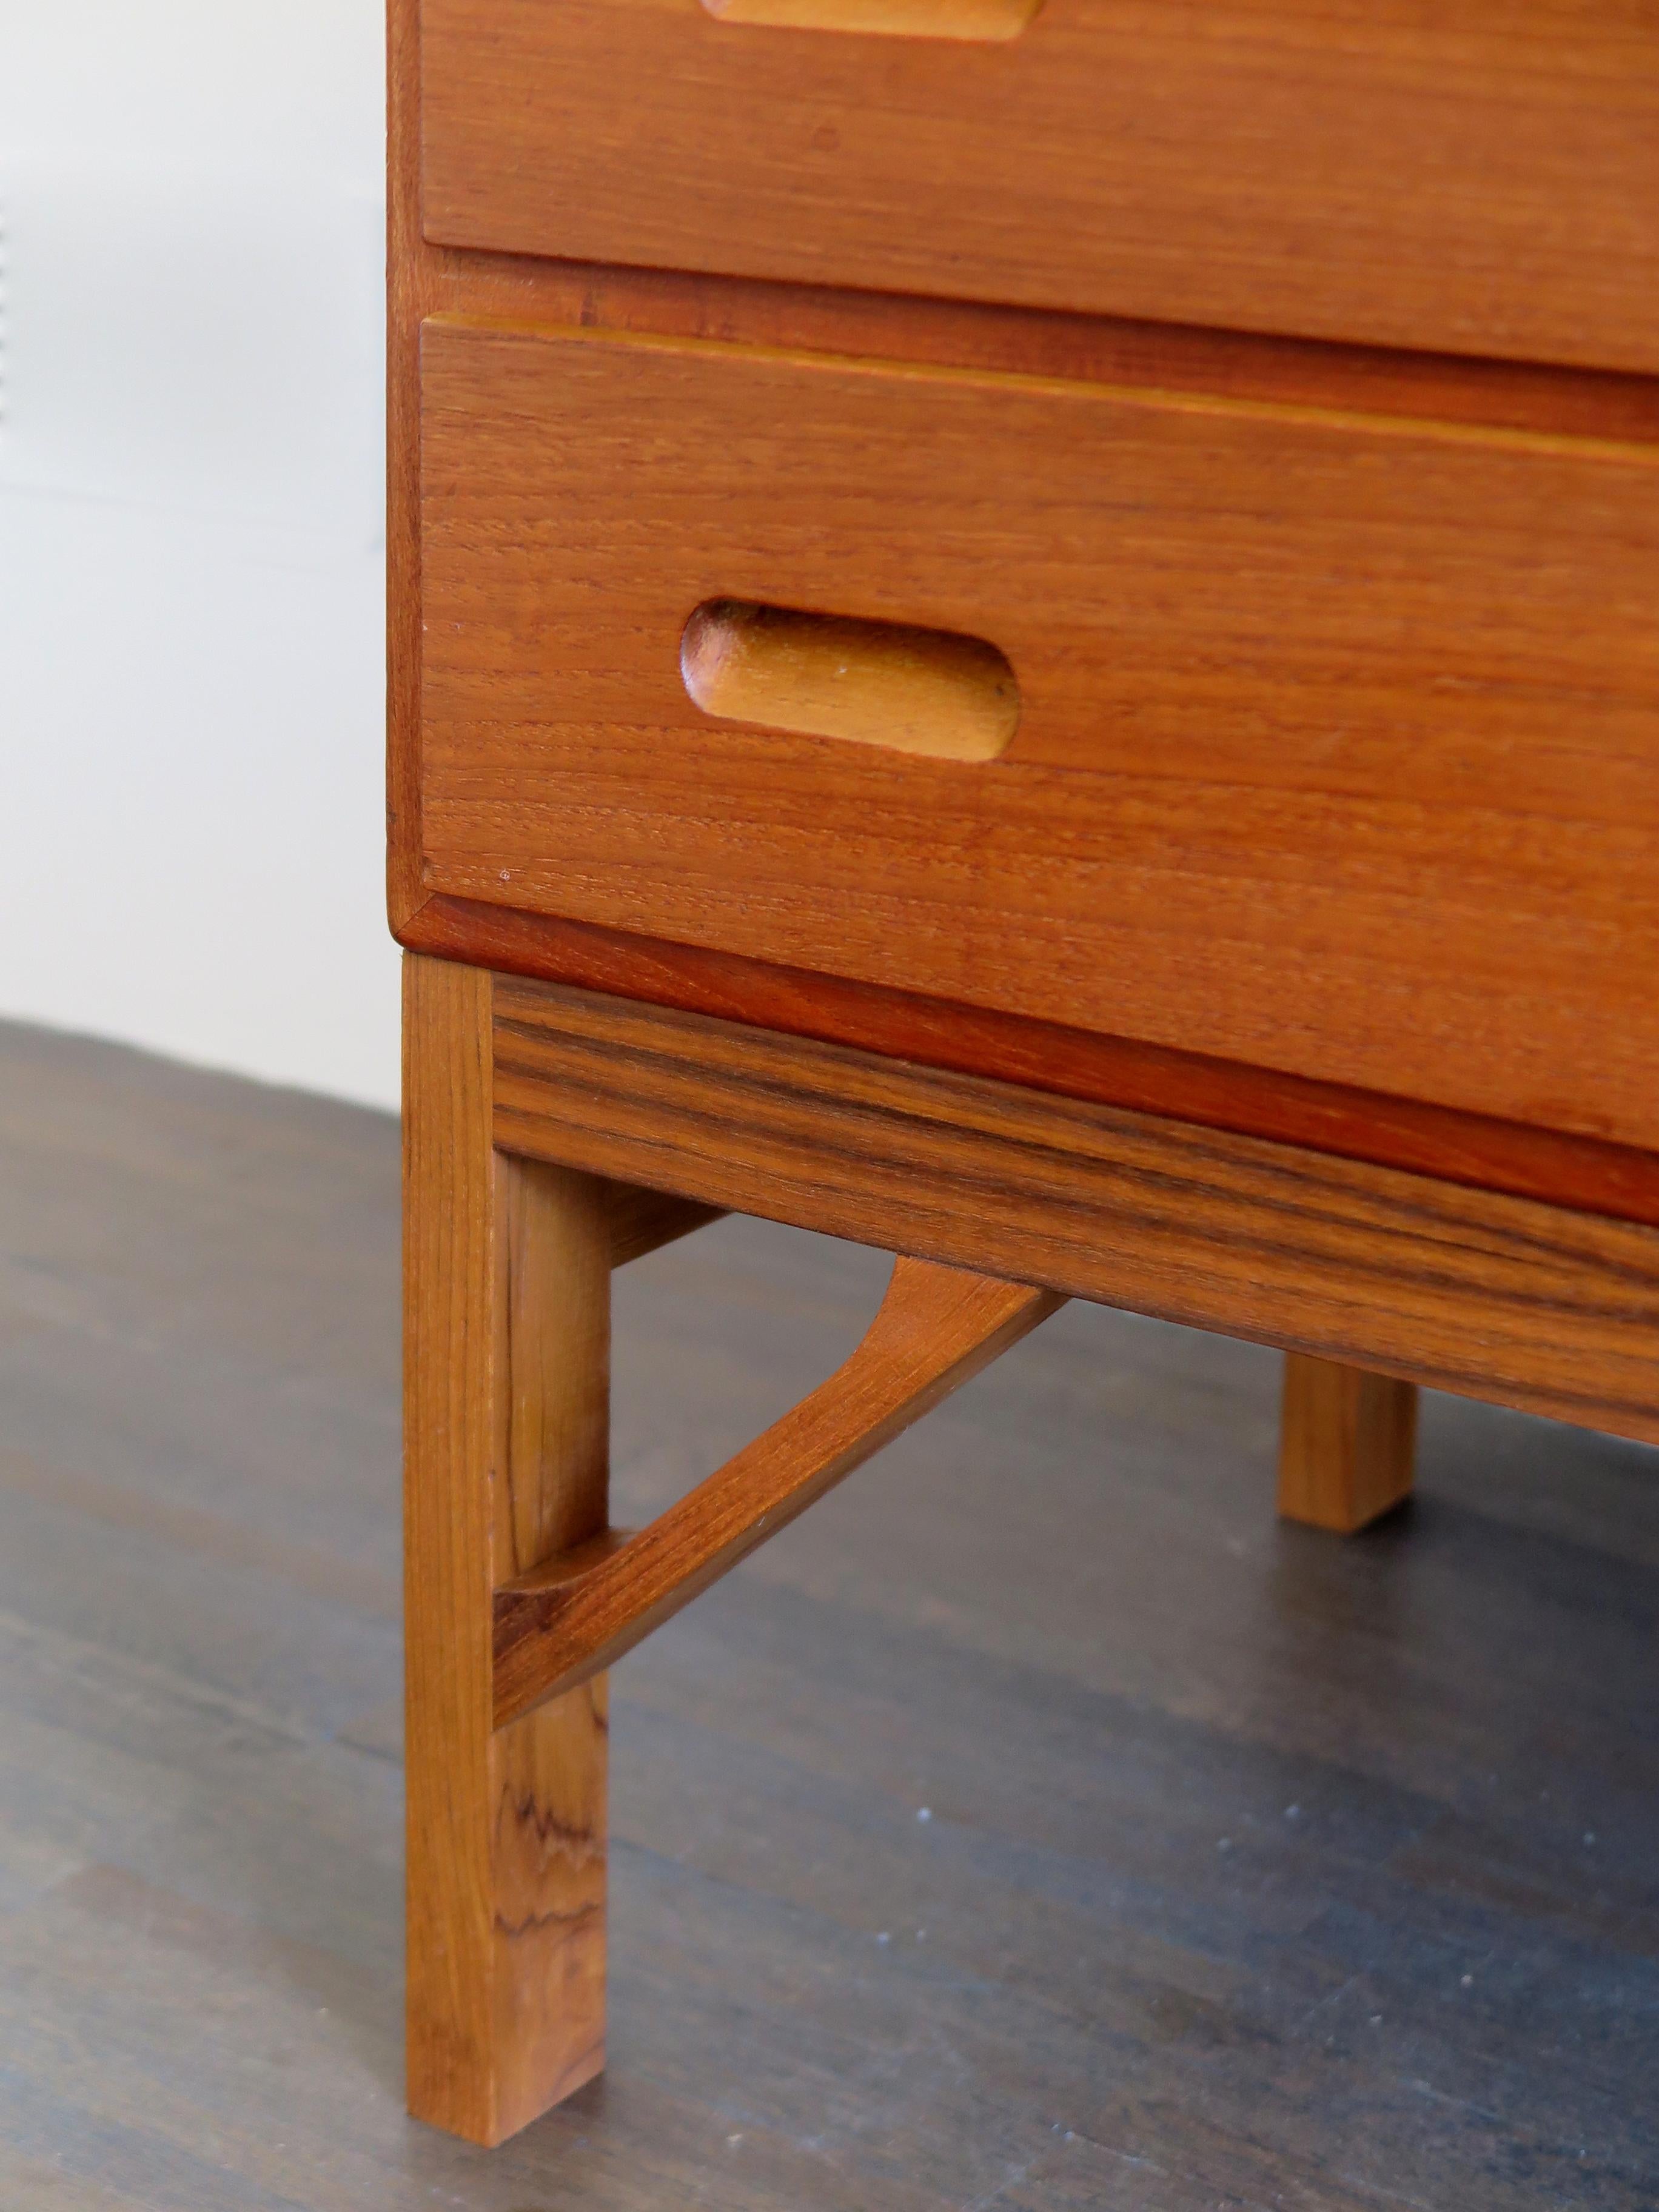 Mid-20th Century Børge Mogensen Scandinavian Midcentury Wood Chest of Drawers 1960s For Sale